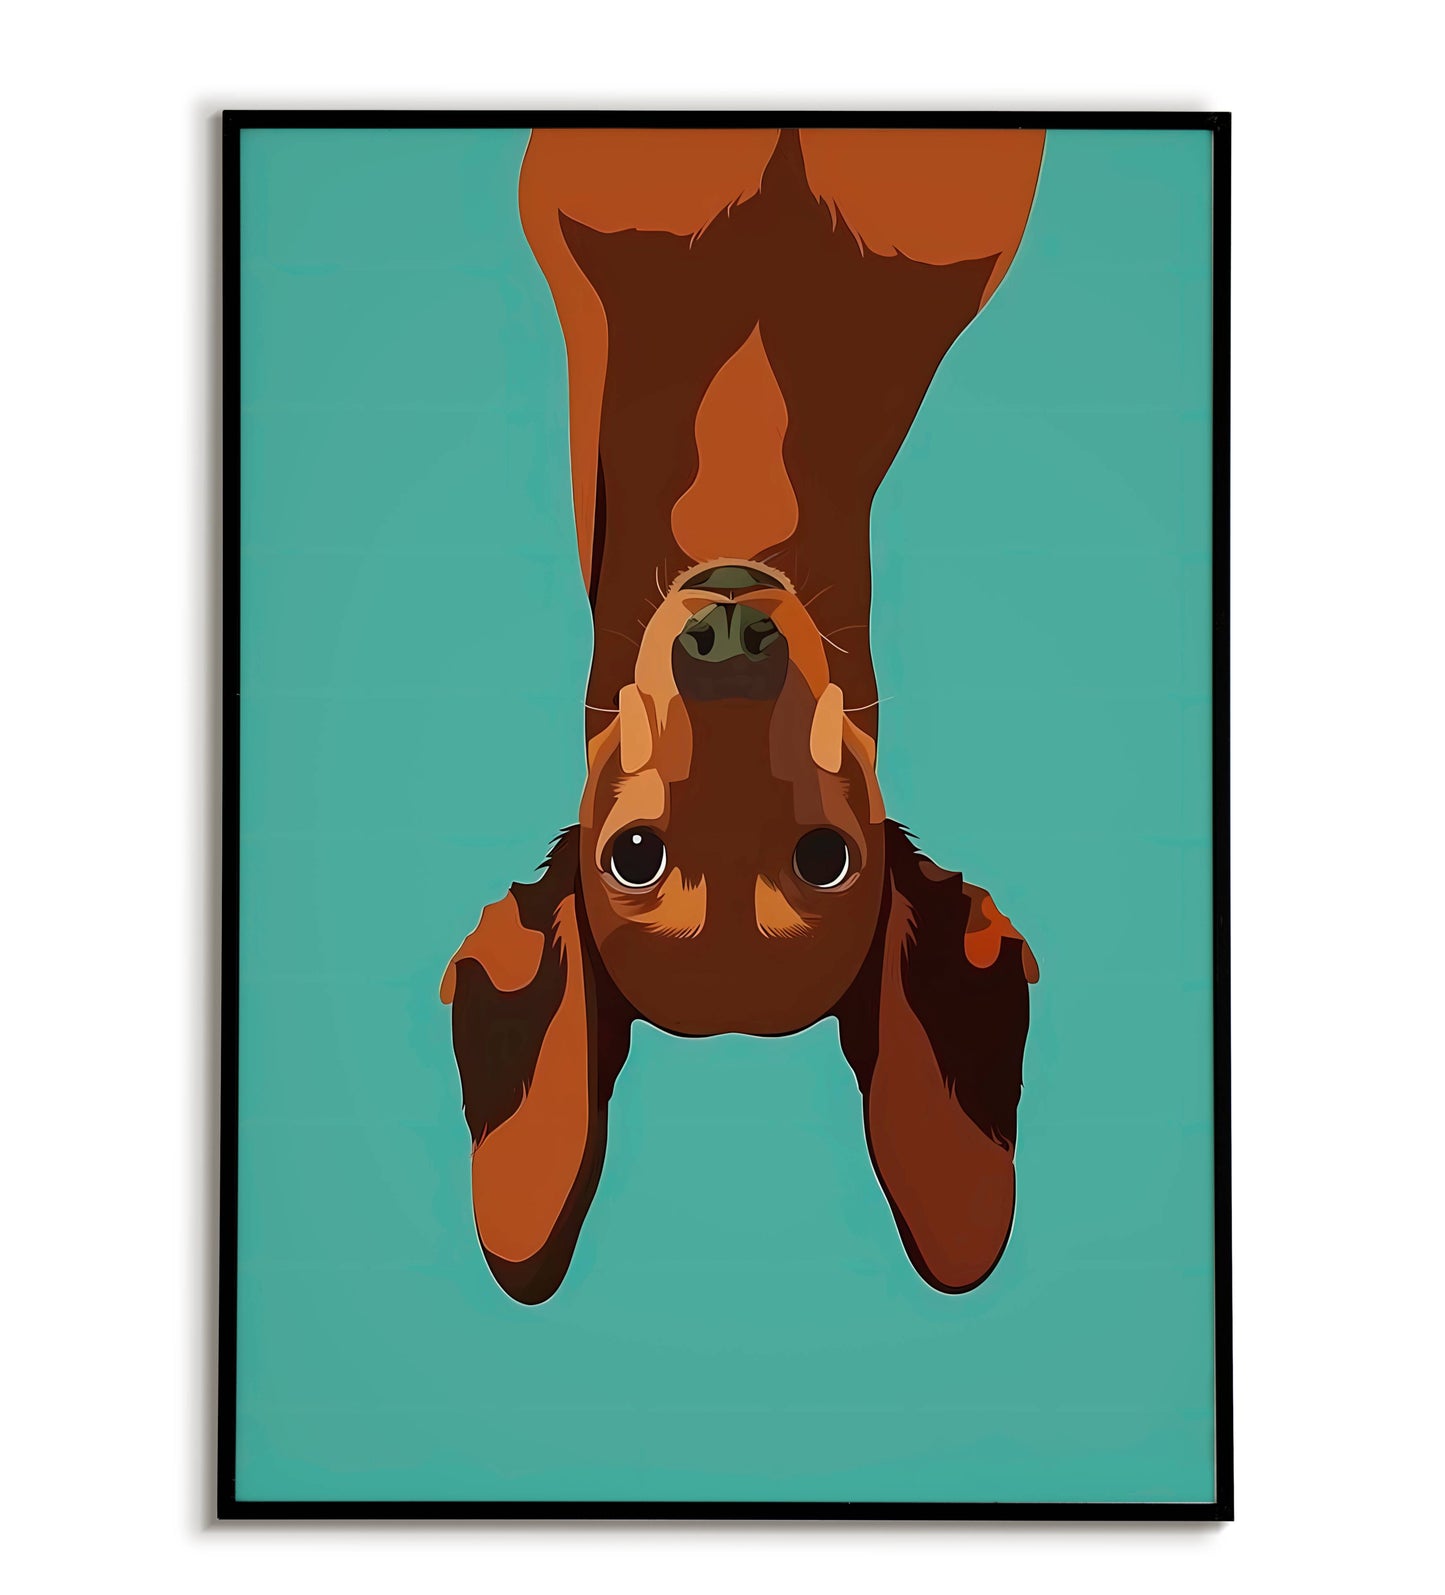 Dog Illustration printable poster. Available for purchase as a physical poster or digital download.